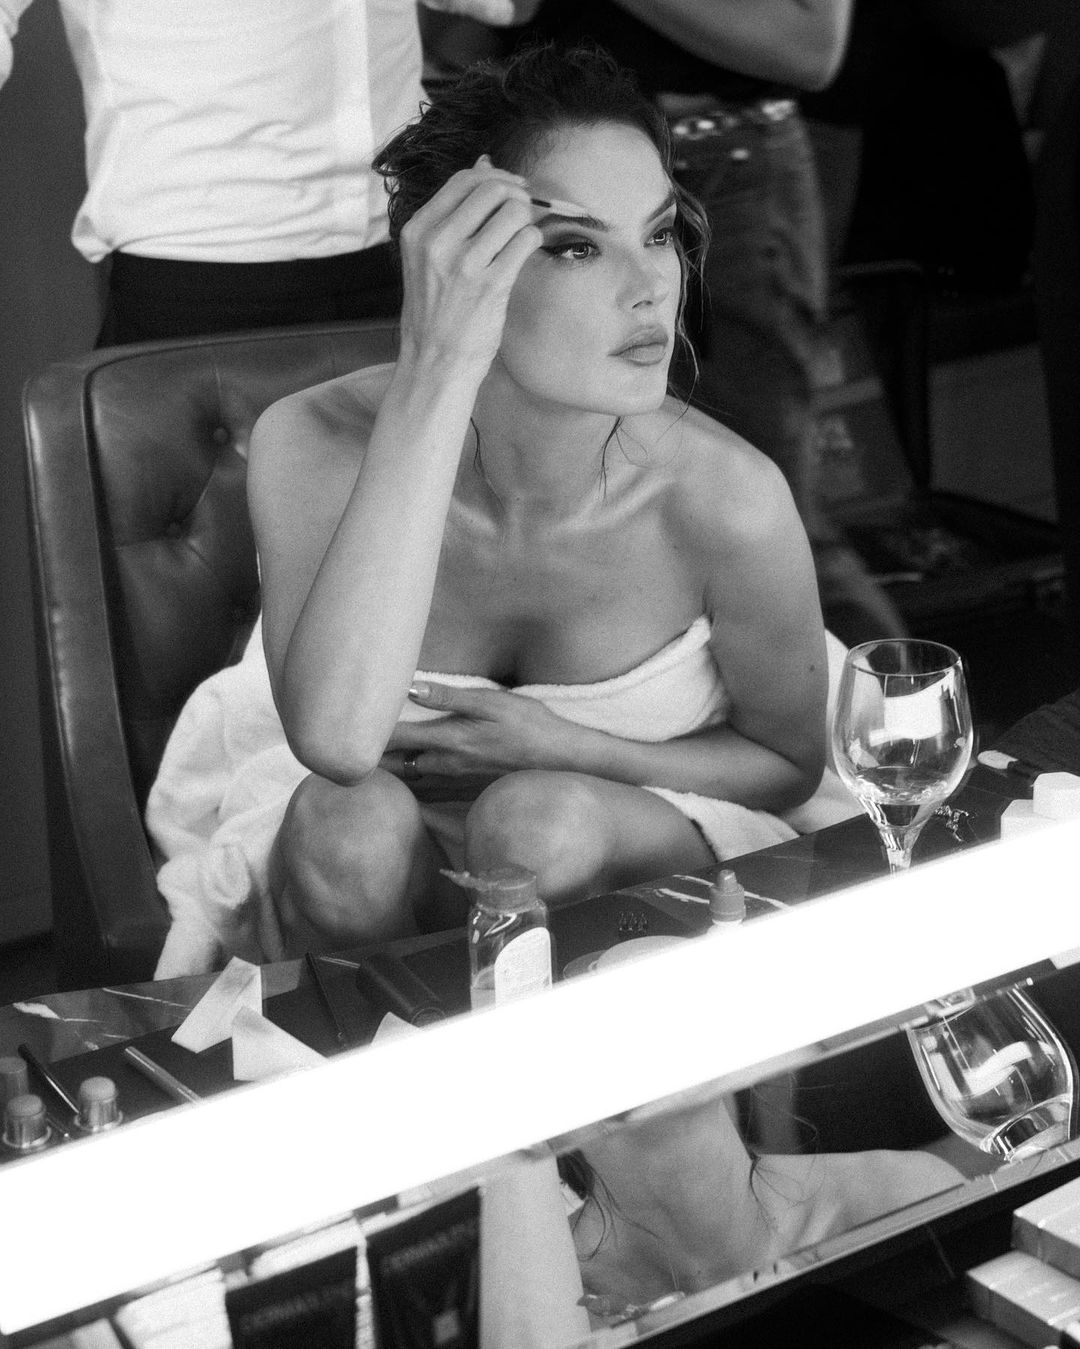 Alessandra Ambrosio is Ready for Carnaval! - Photo 33